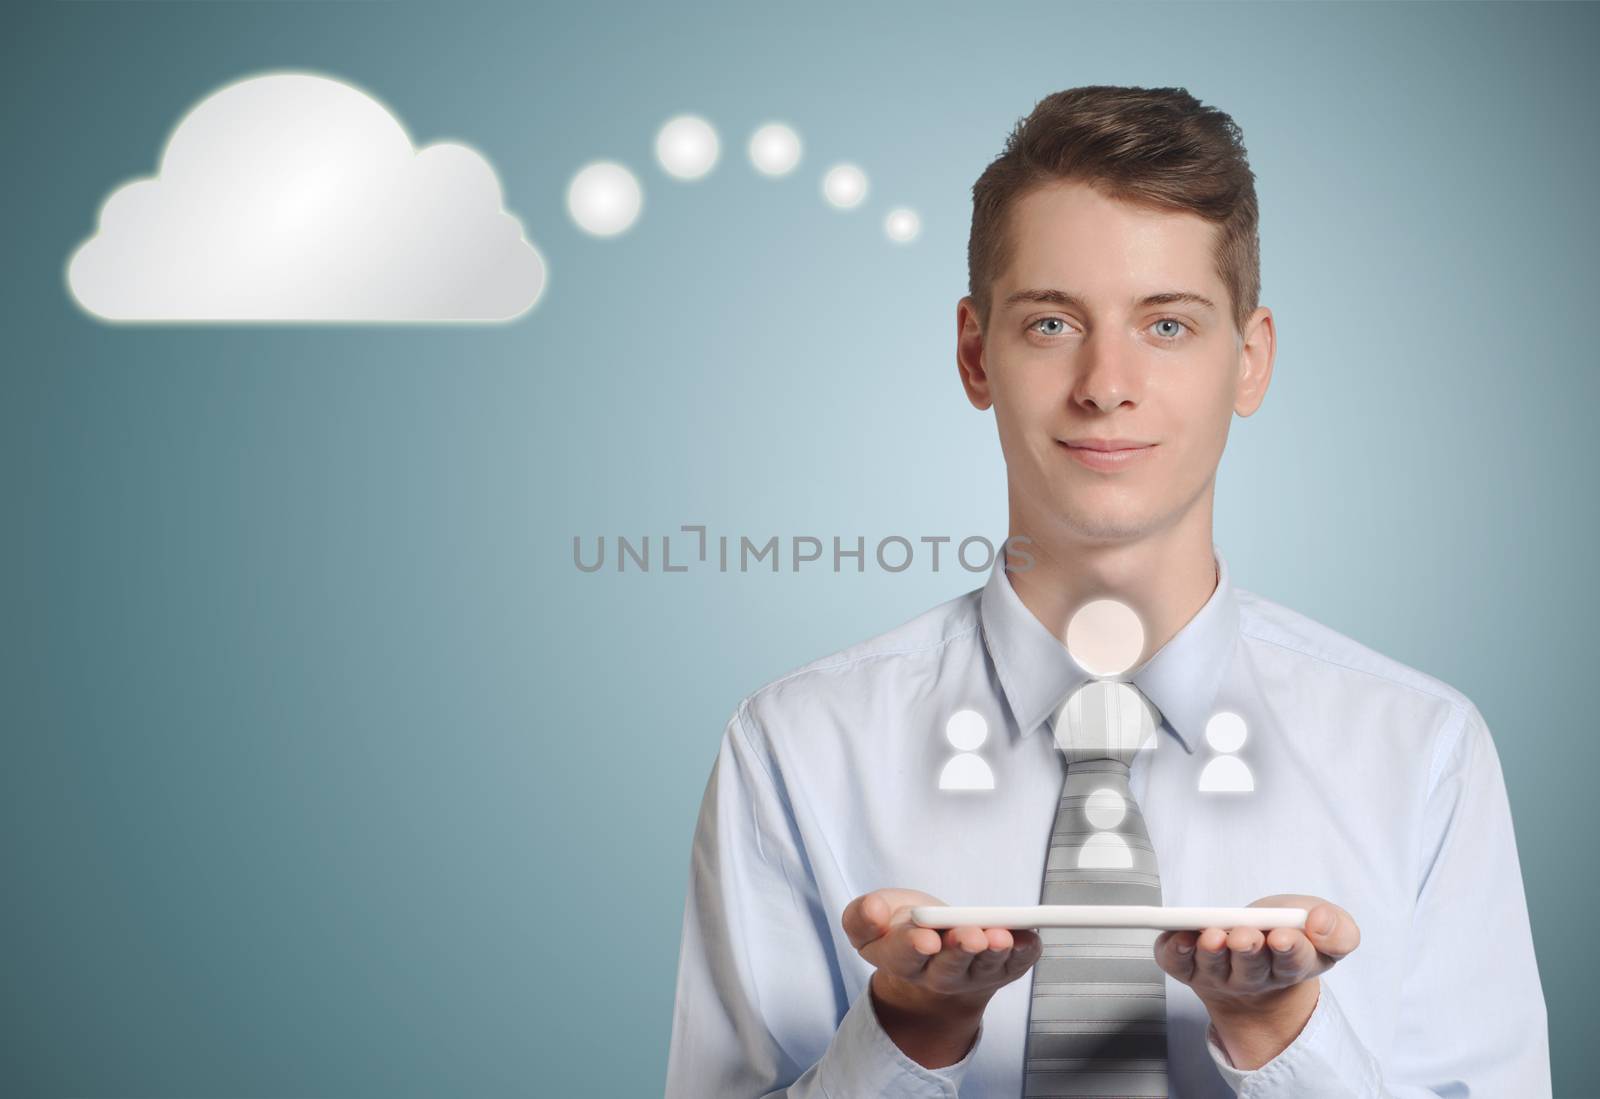 Businessman holding computer tablet with social media people icons in the cloud